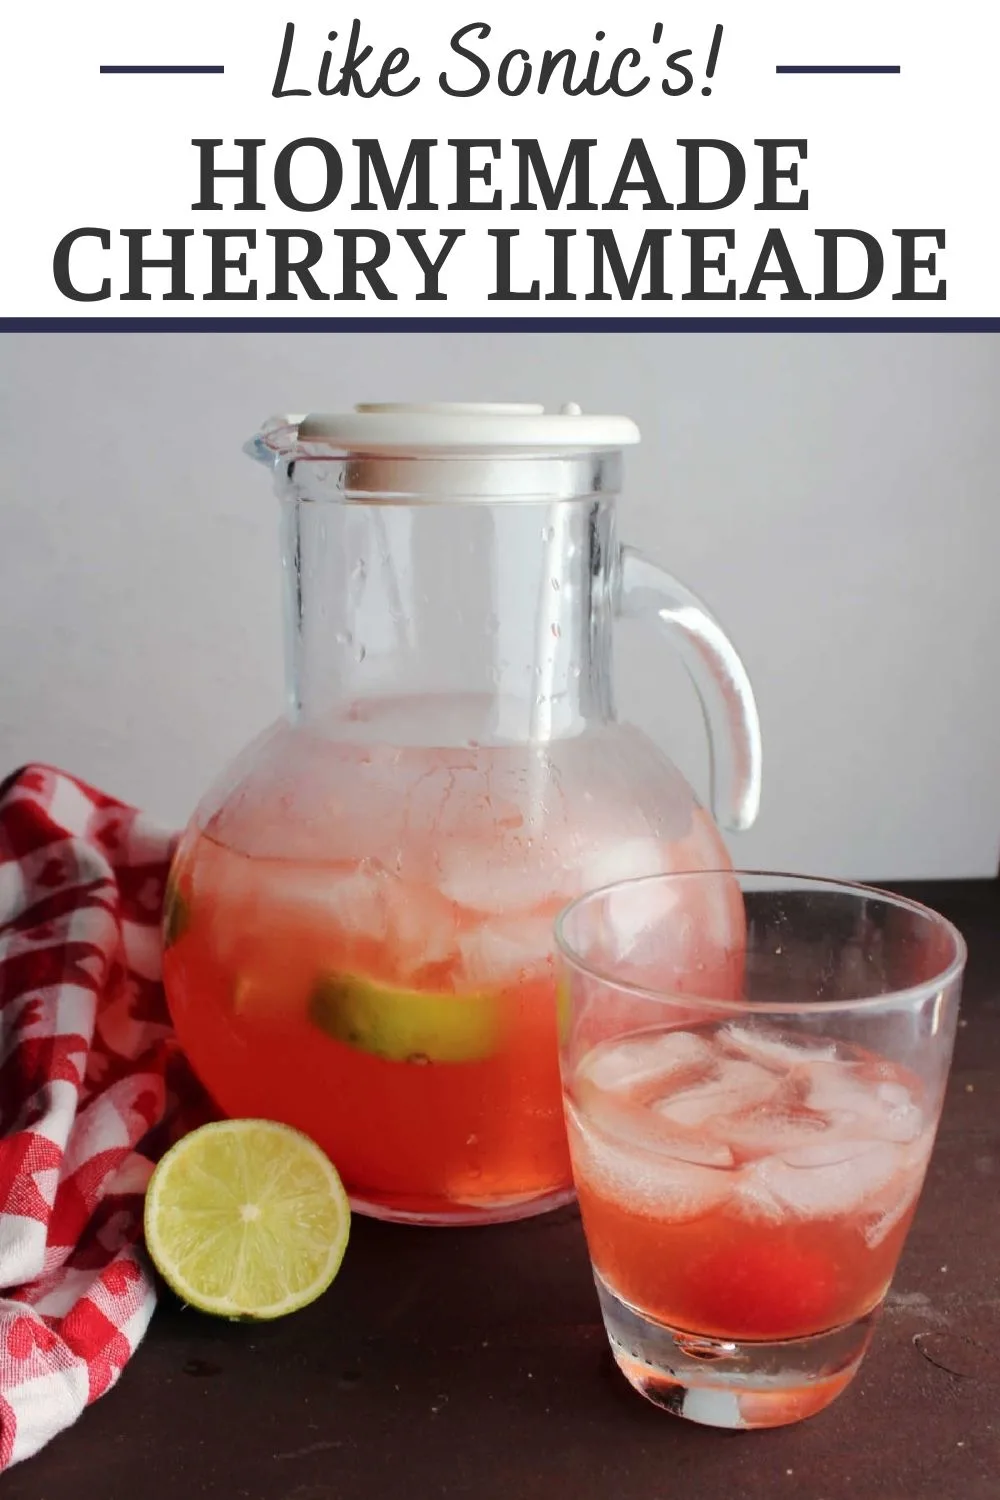 Cool off with a refreshing drink of homemade freshly squeezed cherry limeade. It is super simple to make and has the perfect balance of sweet and tart.